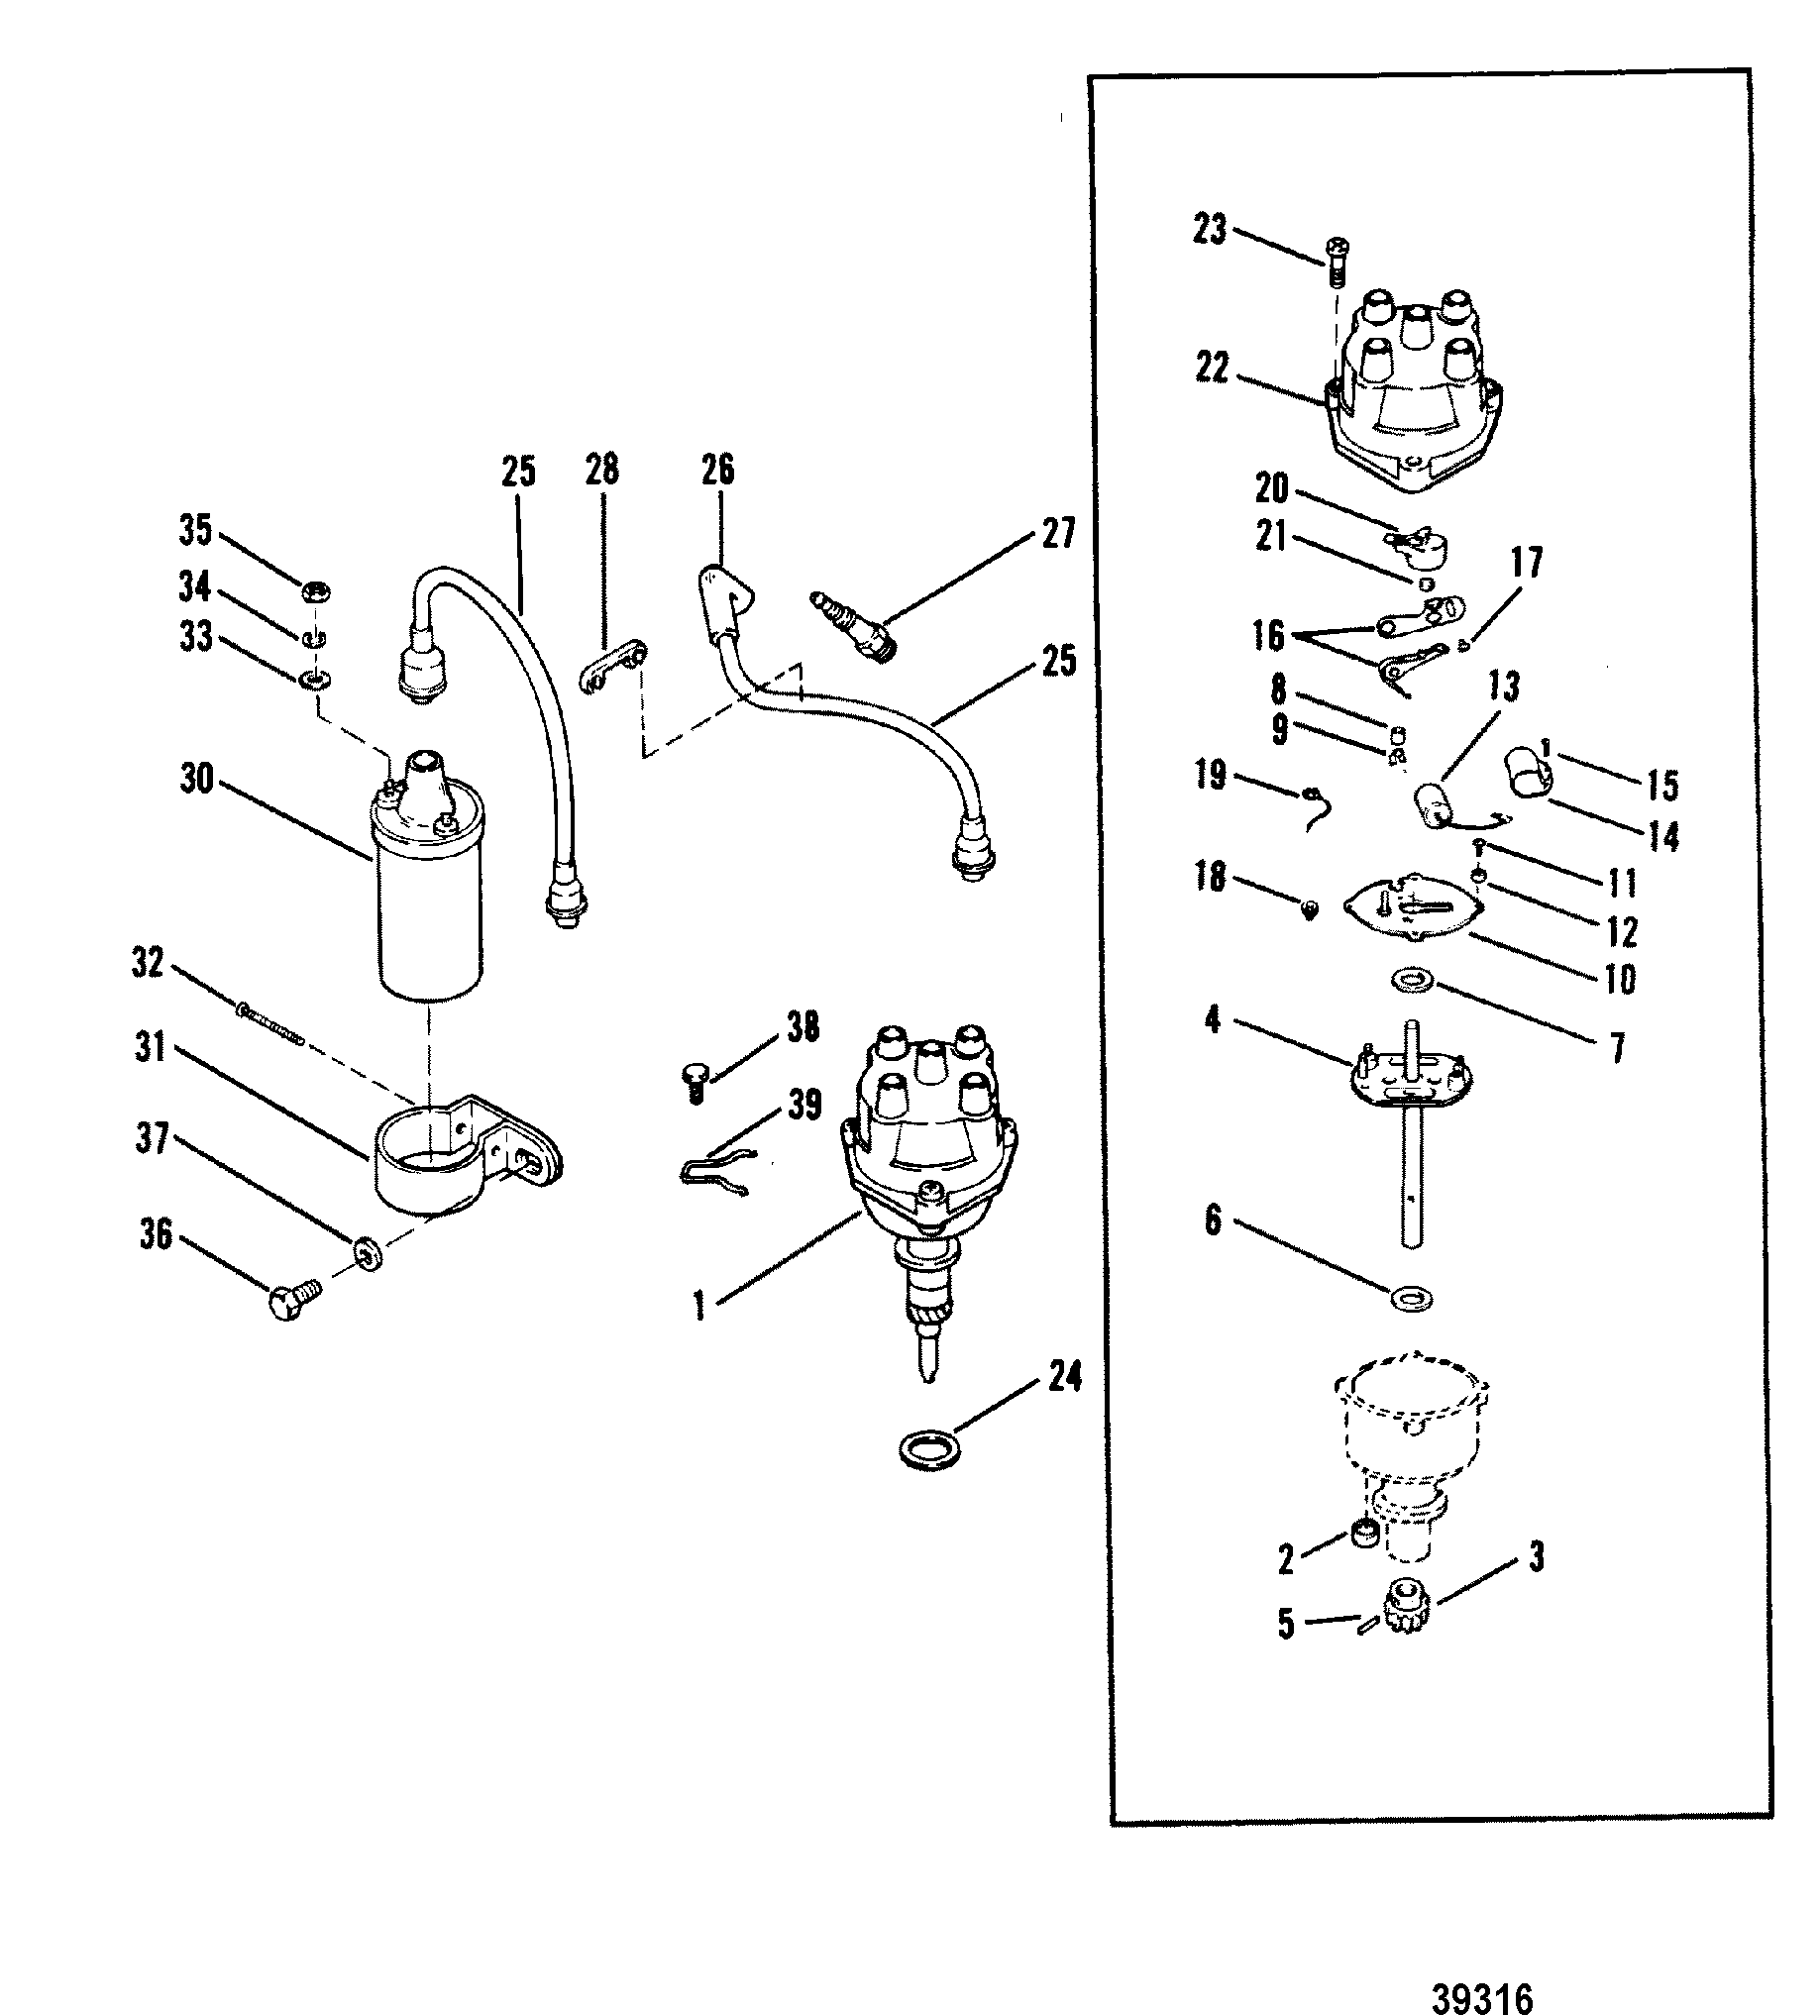 CONVENTIONAL IGNITION COMPONENTS